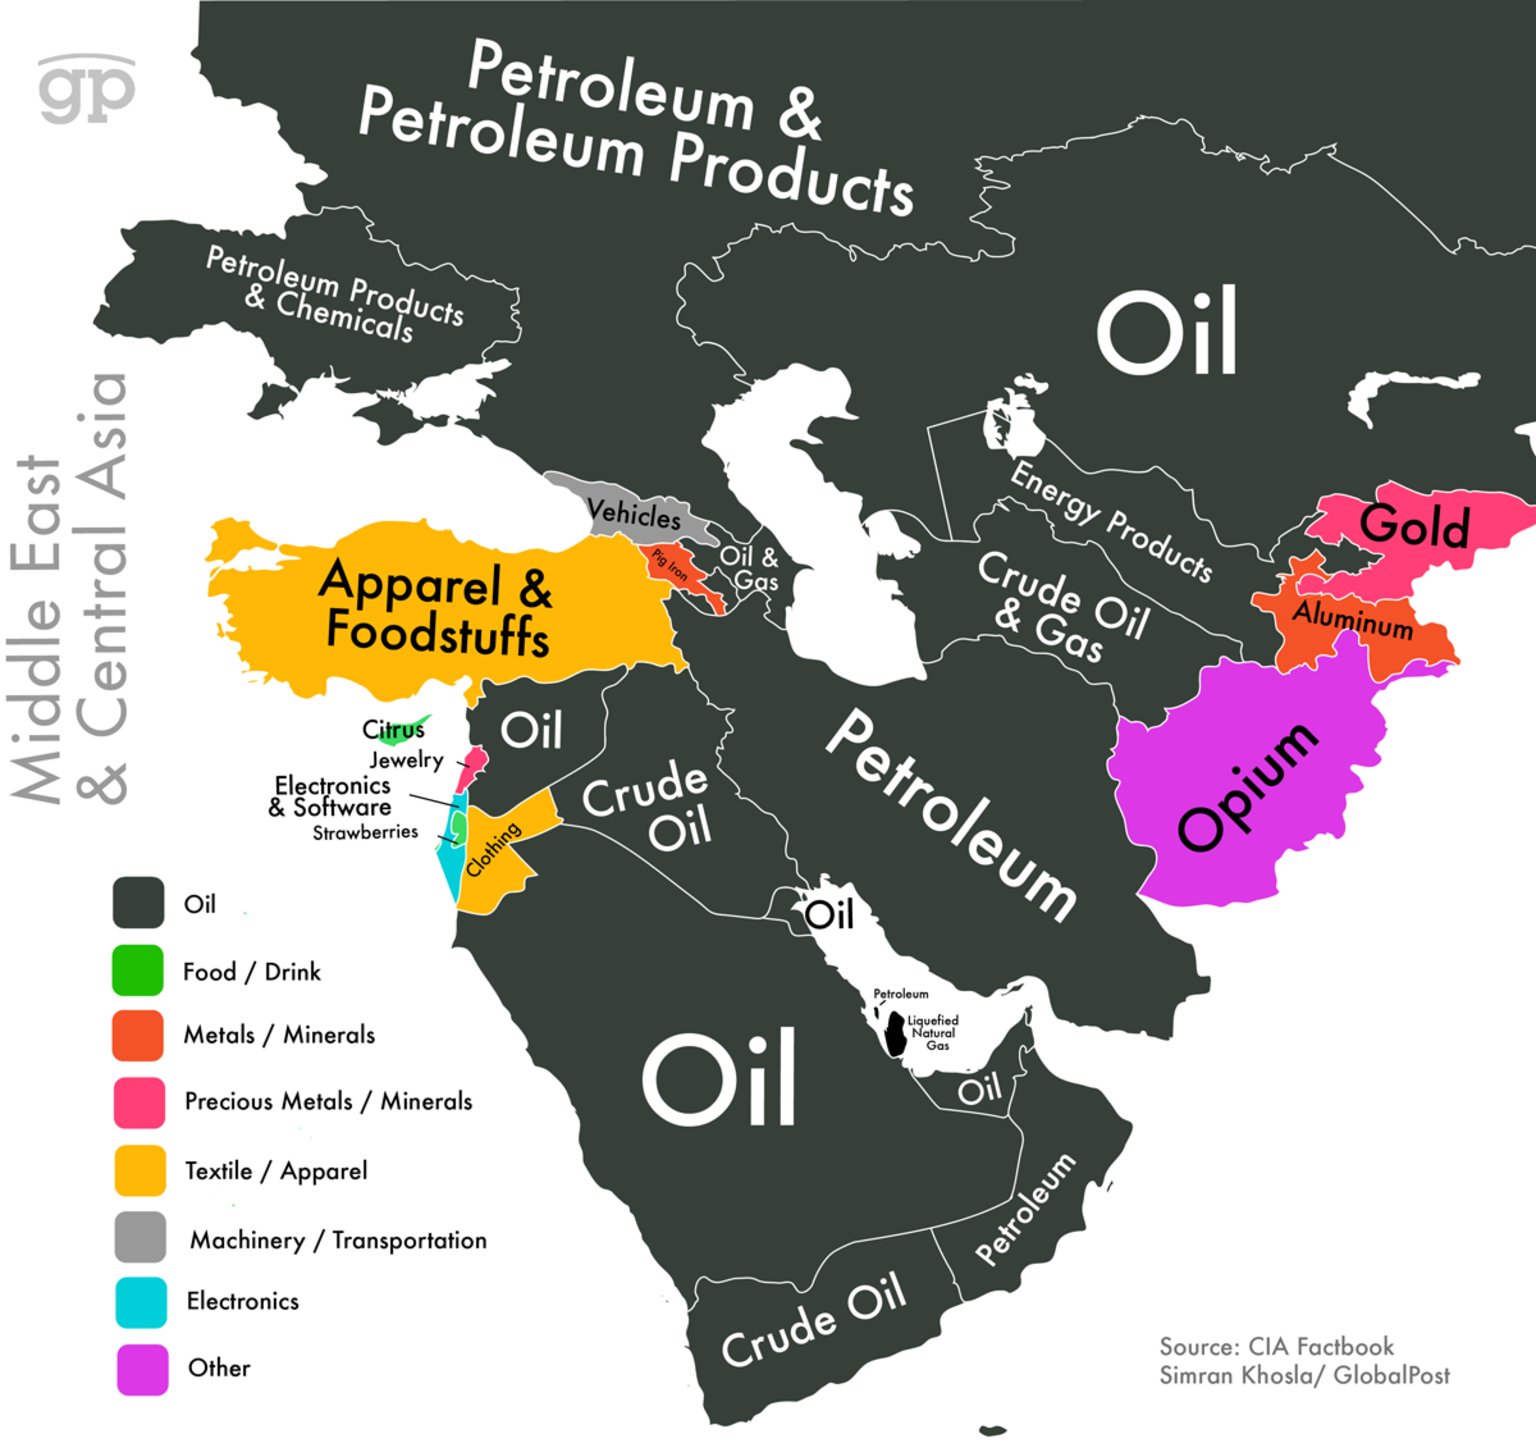 This One Map Sums Up the Economy of the Middle East